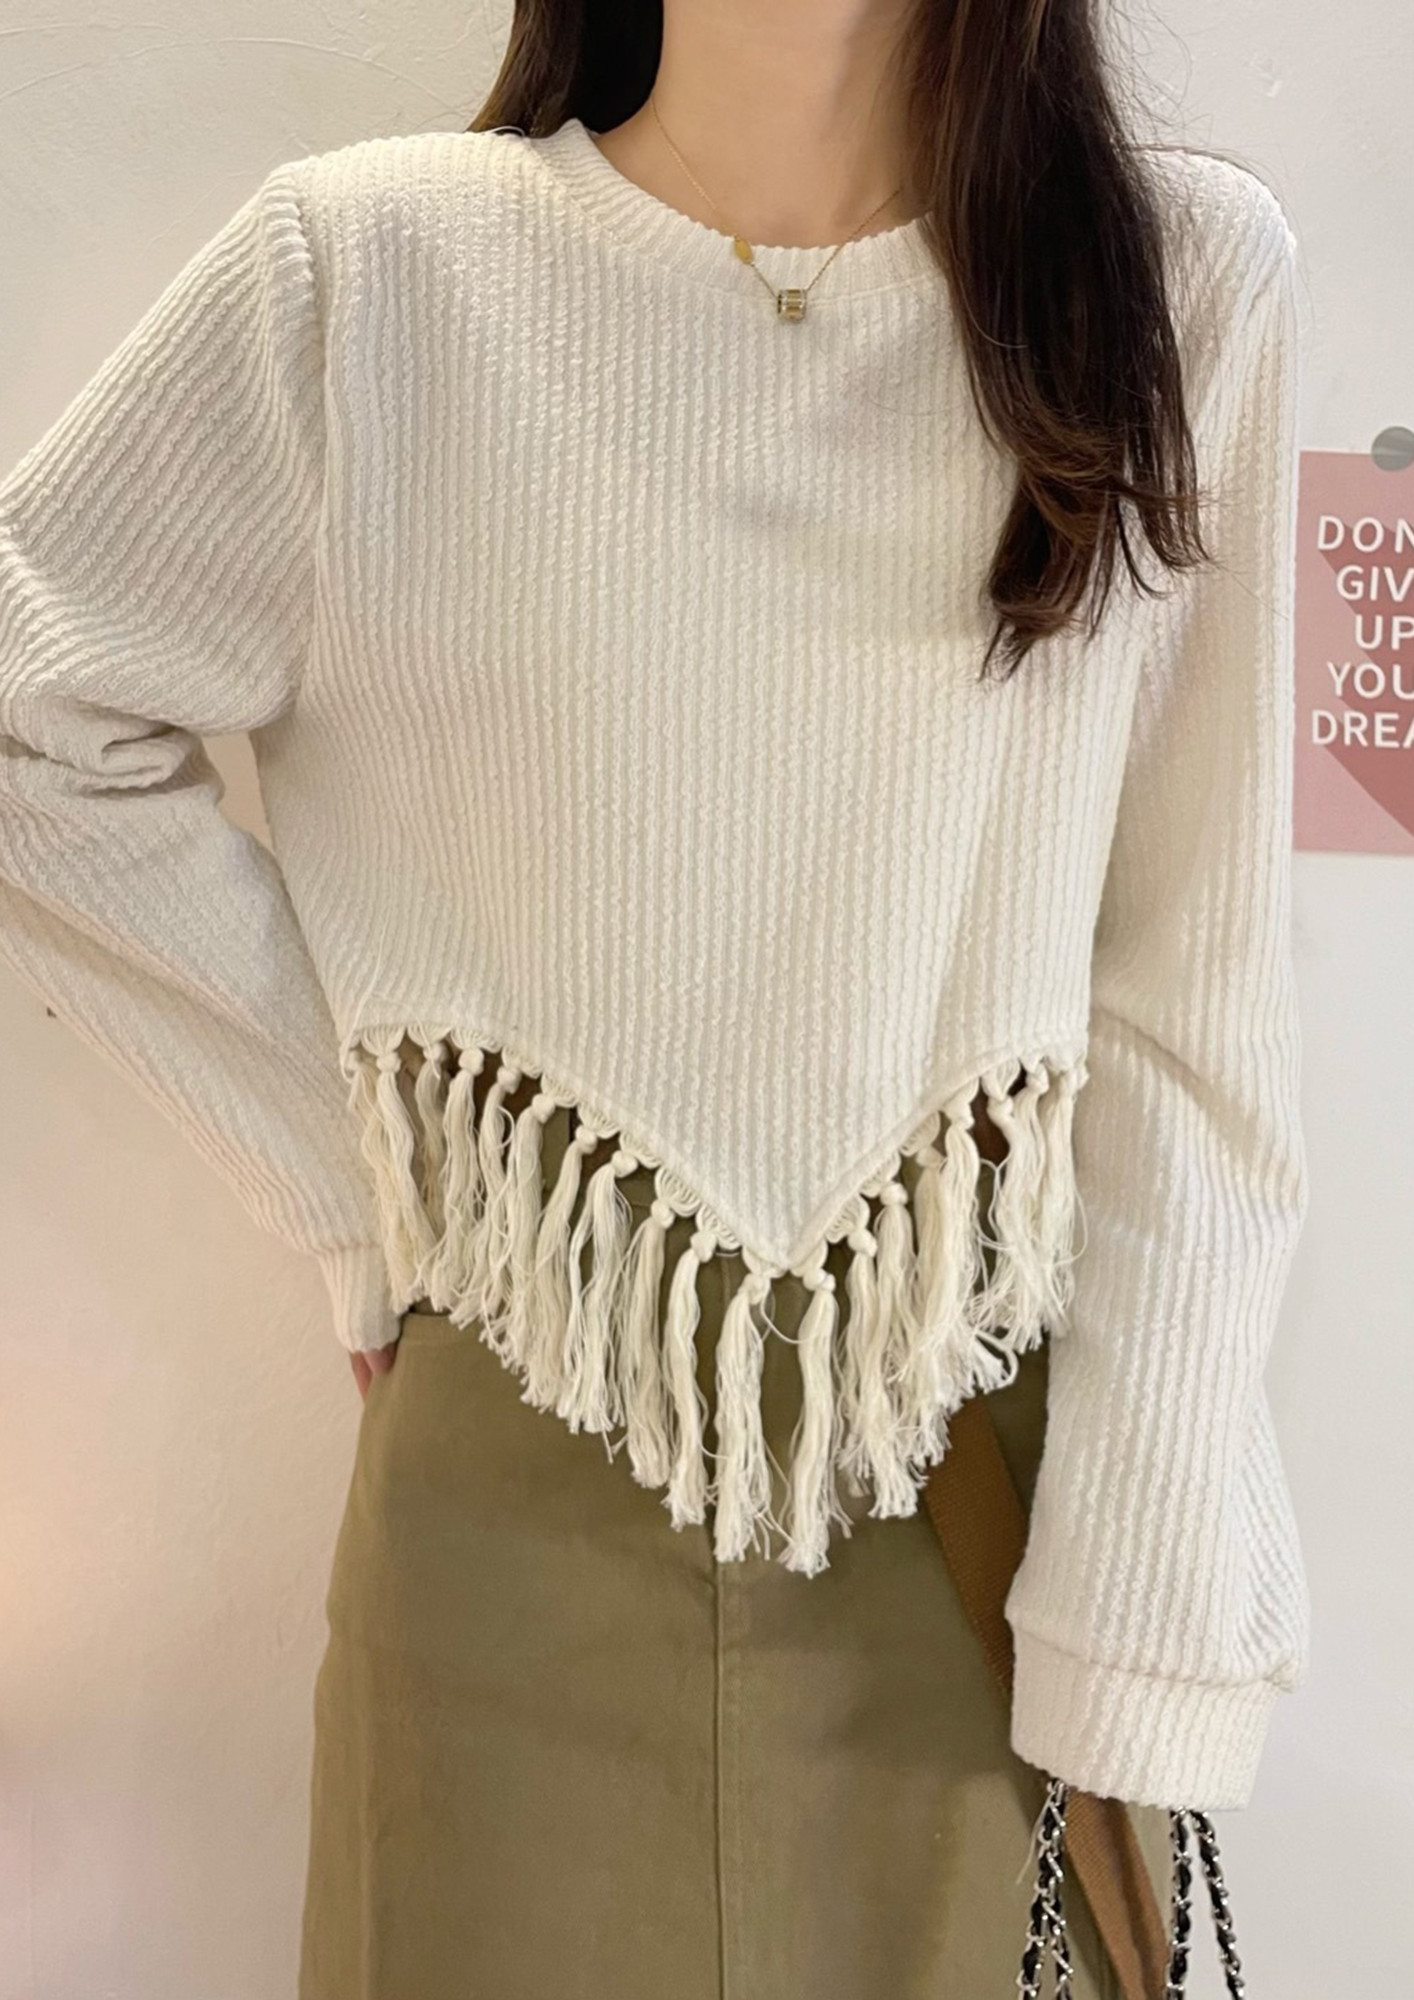 Knit sweater with ruffle trim and leggings co-ord - PROMOTION